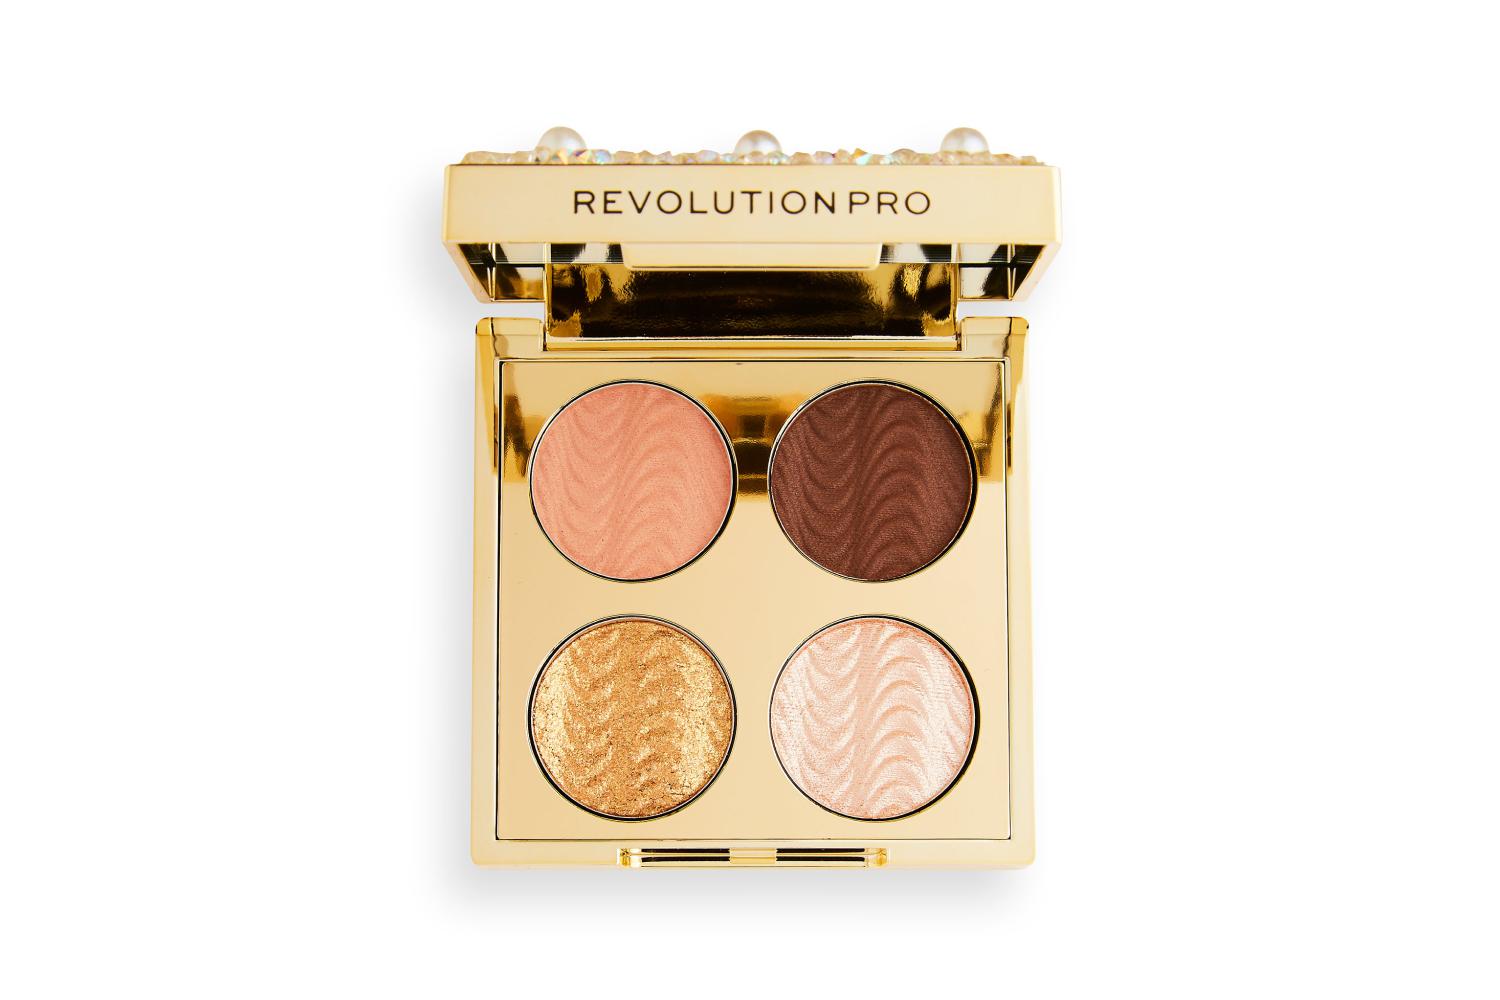 Ultimate eye look palette, Diamonds and pearls, Revolution Pro